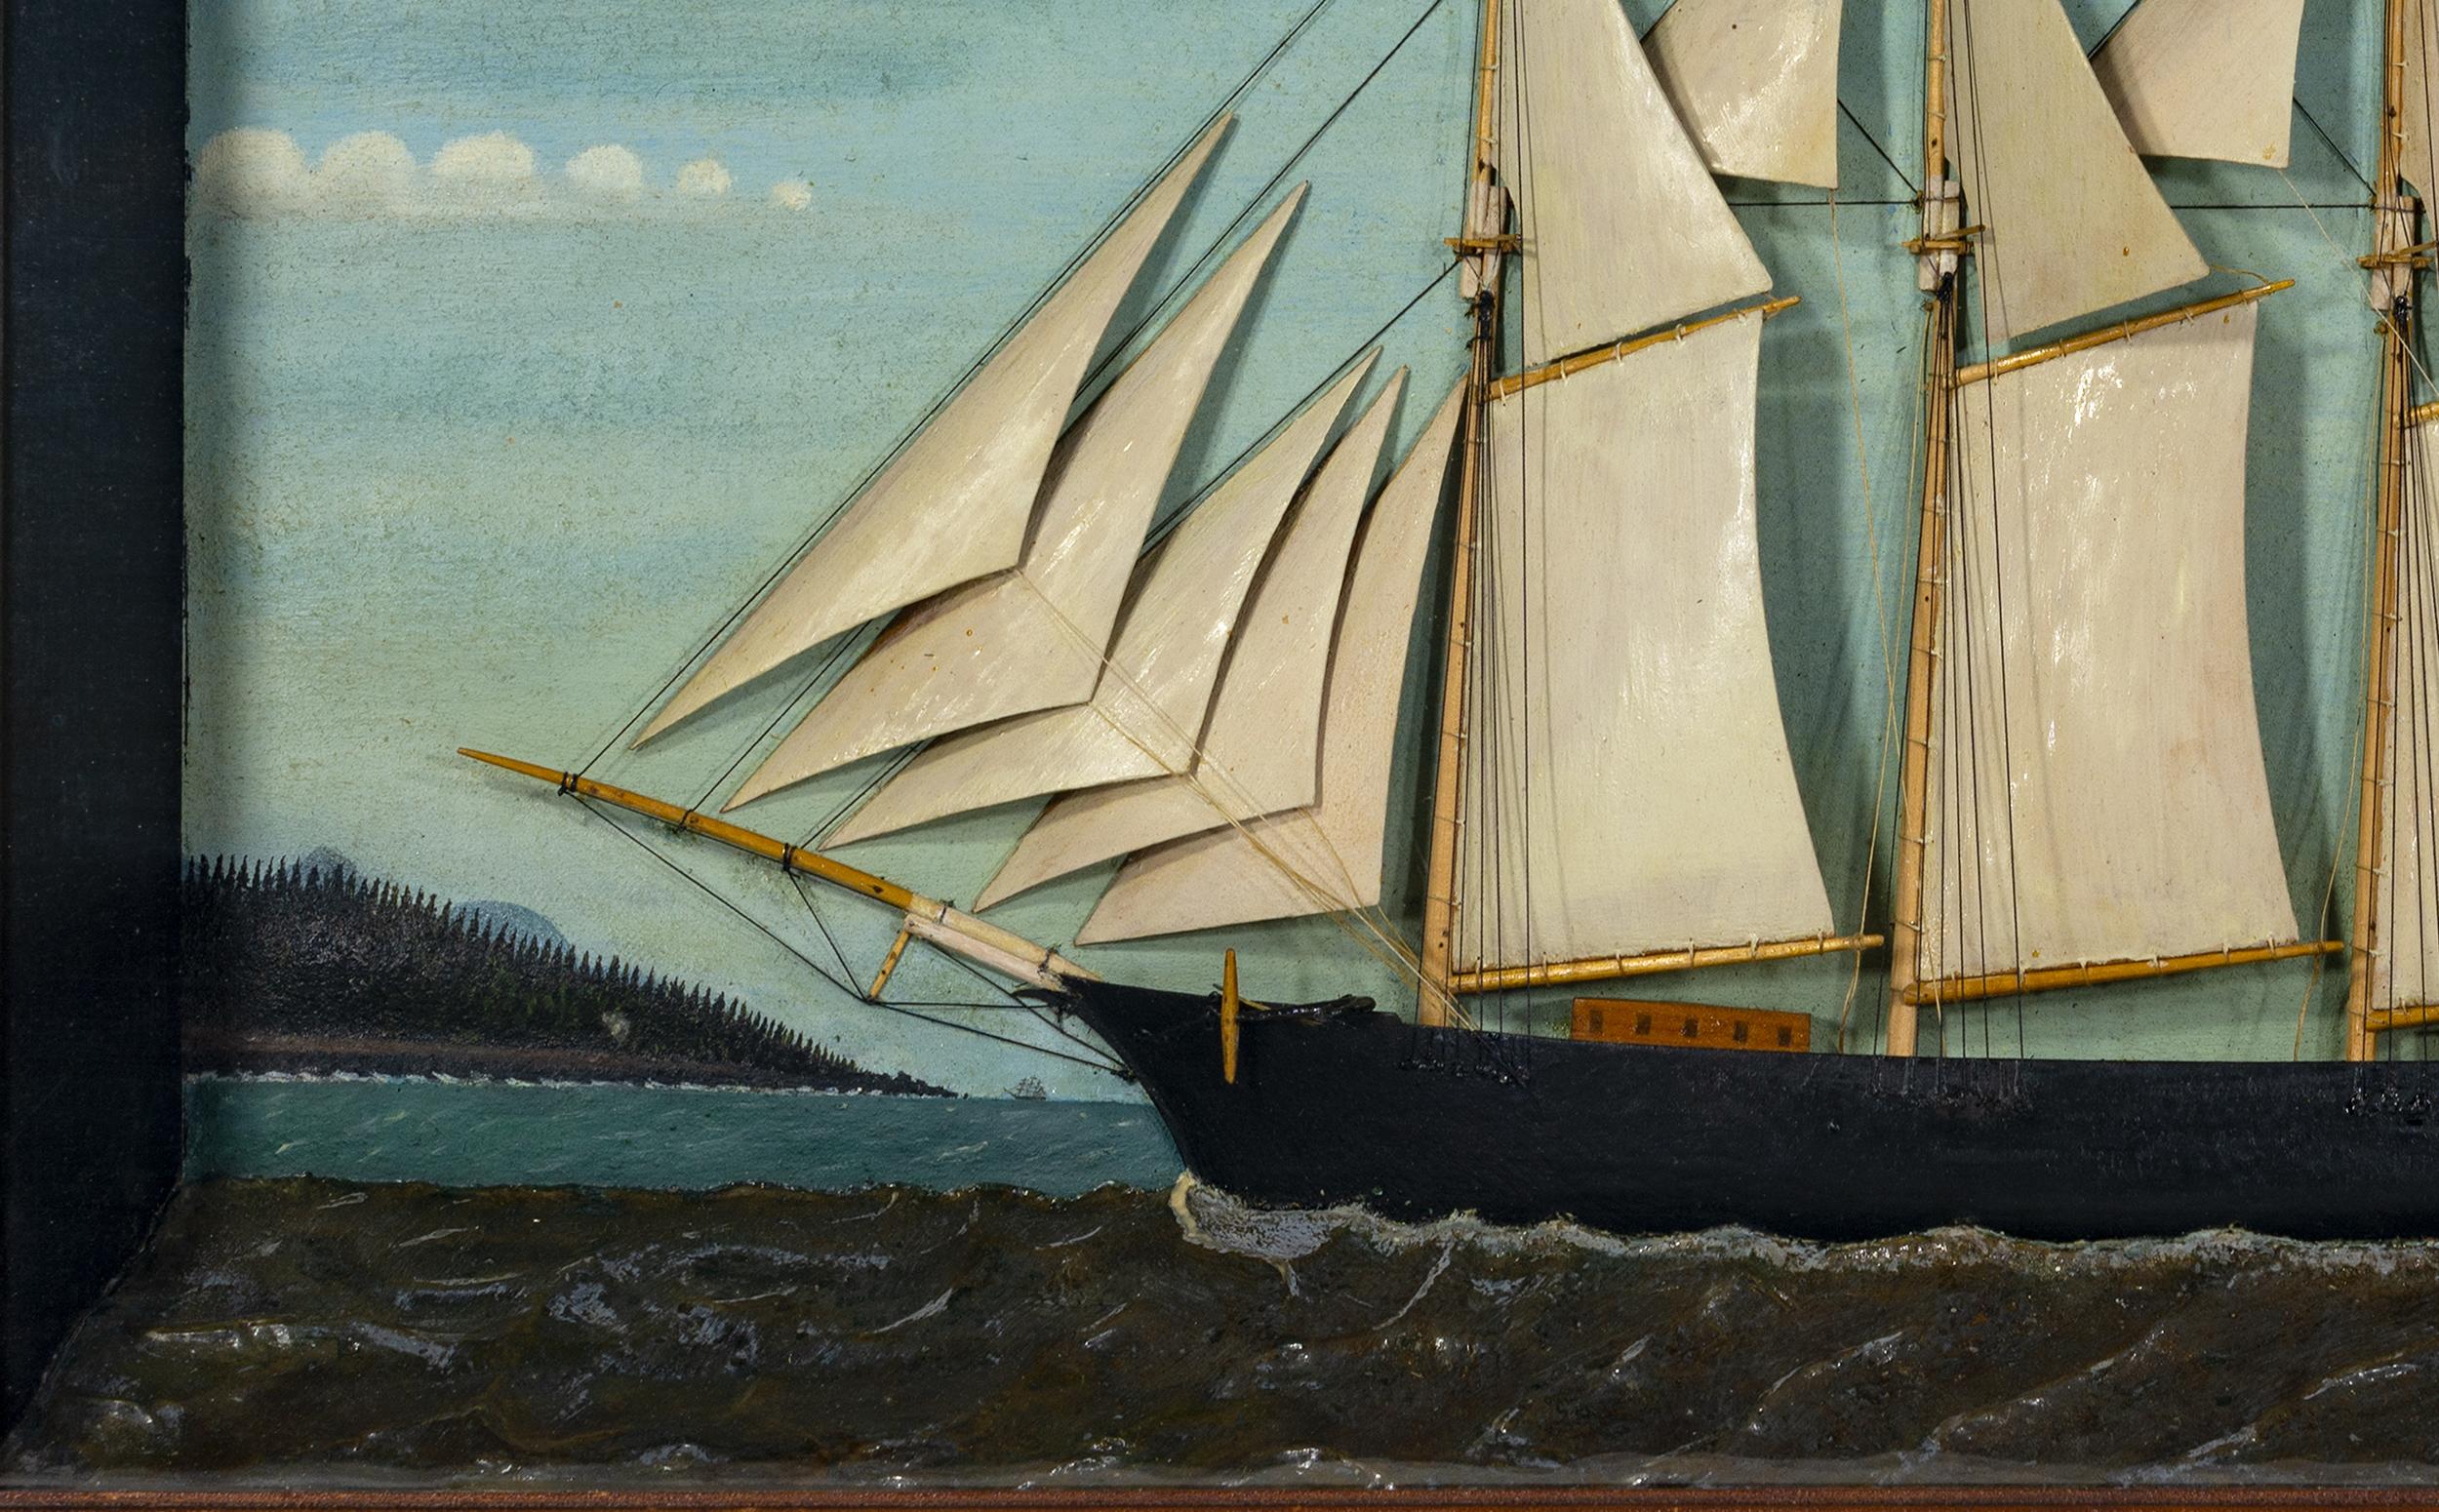 Ship diorama of a four--mast schooner with carved wooden hull, sails, masts, and accouterments, mounted in a deep mitered wood frame with painted putty sea and painted background of the sky with a shoreline and steamer in the background.